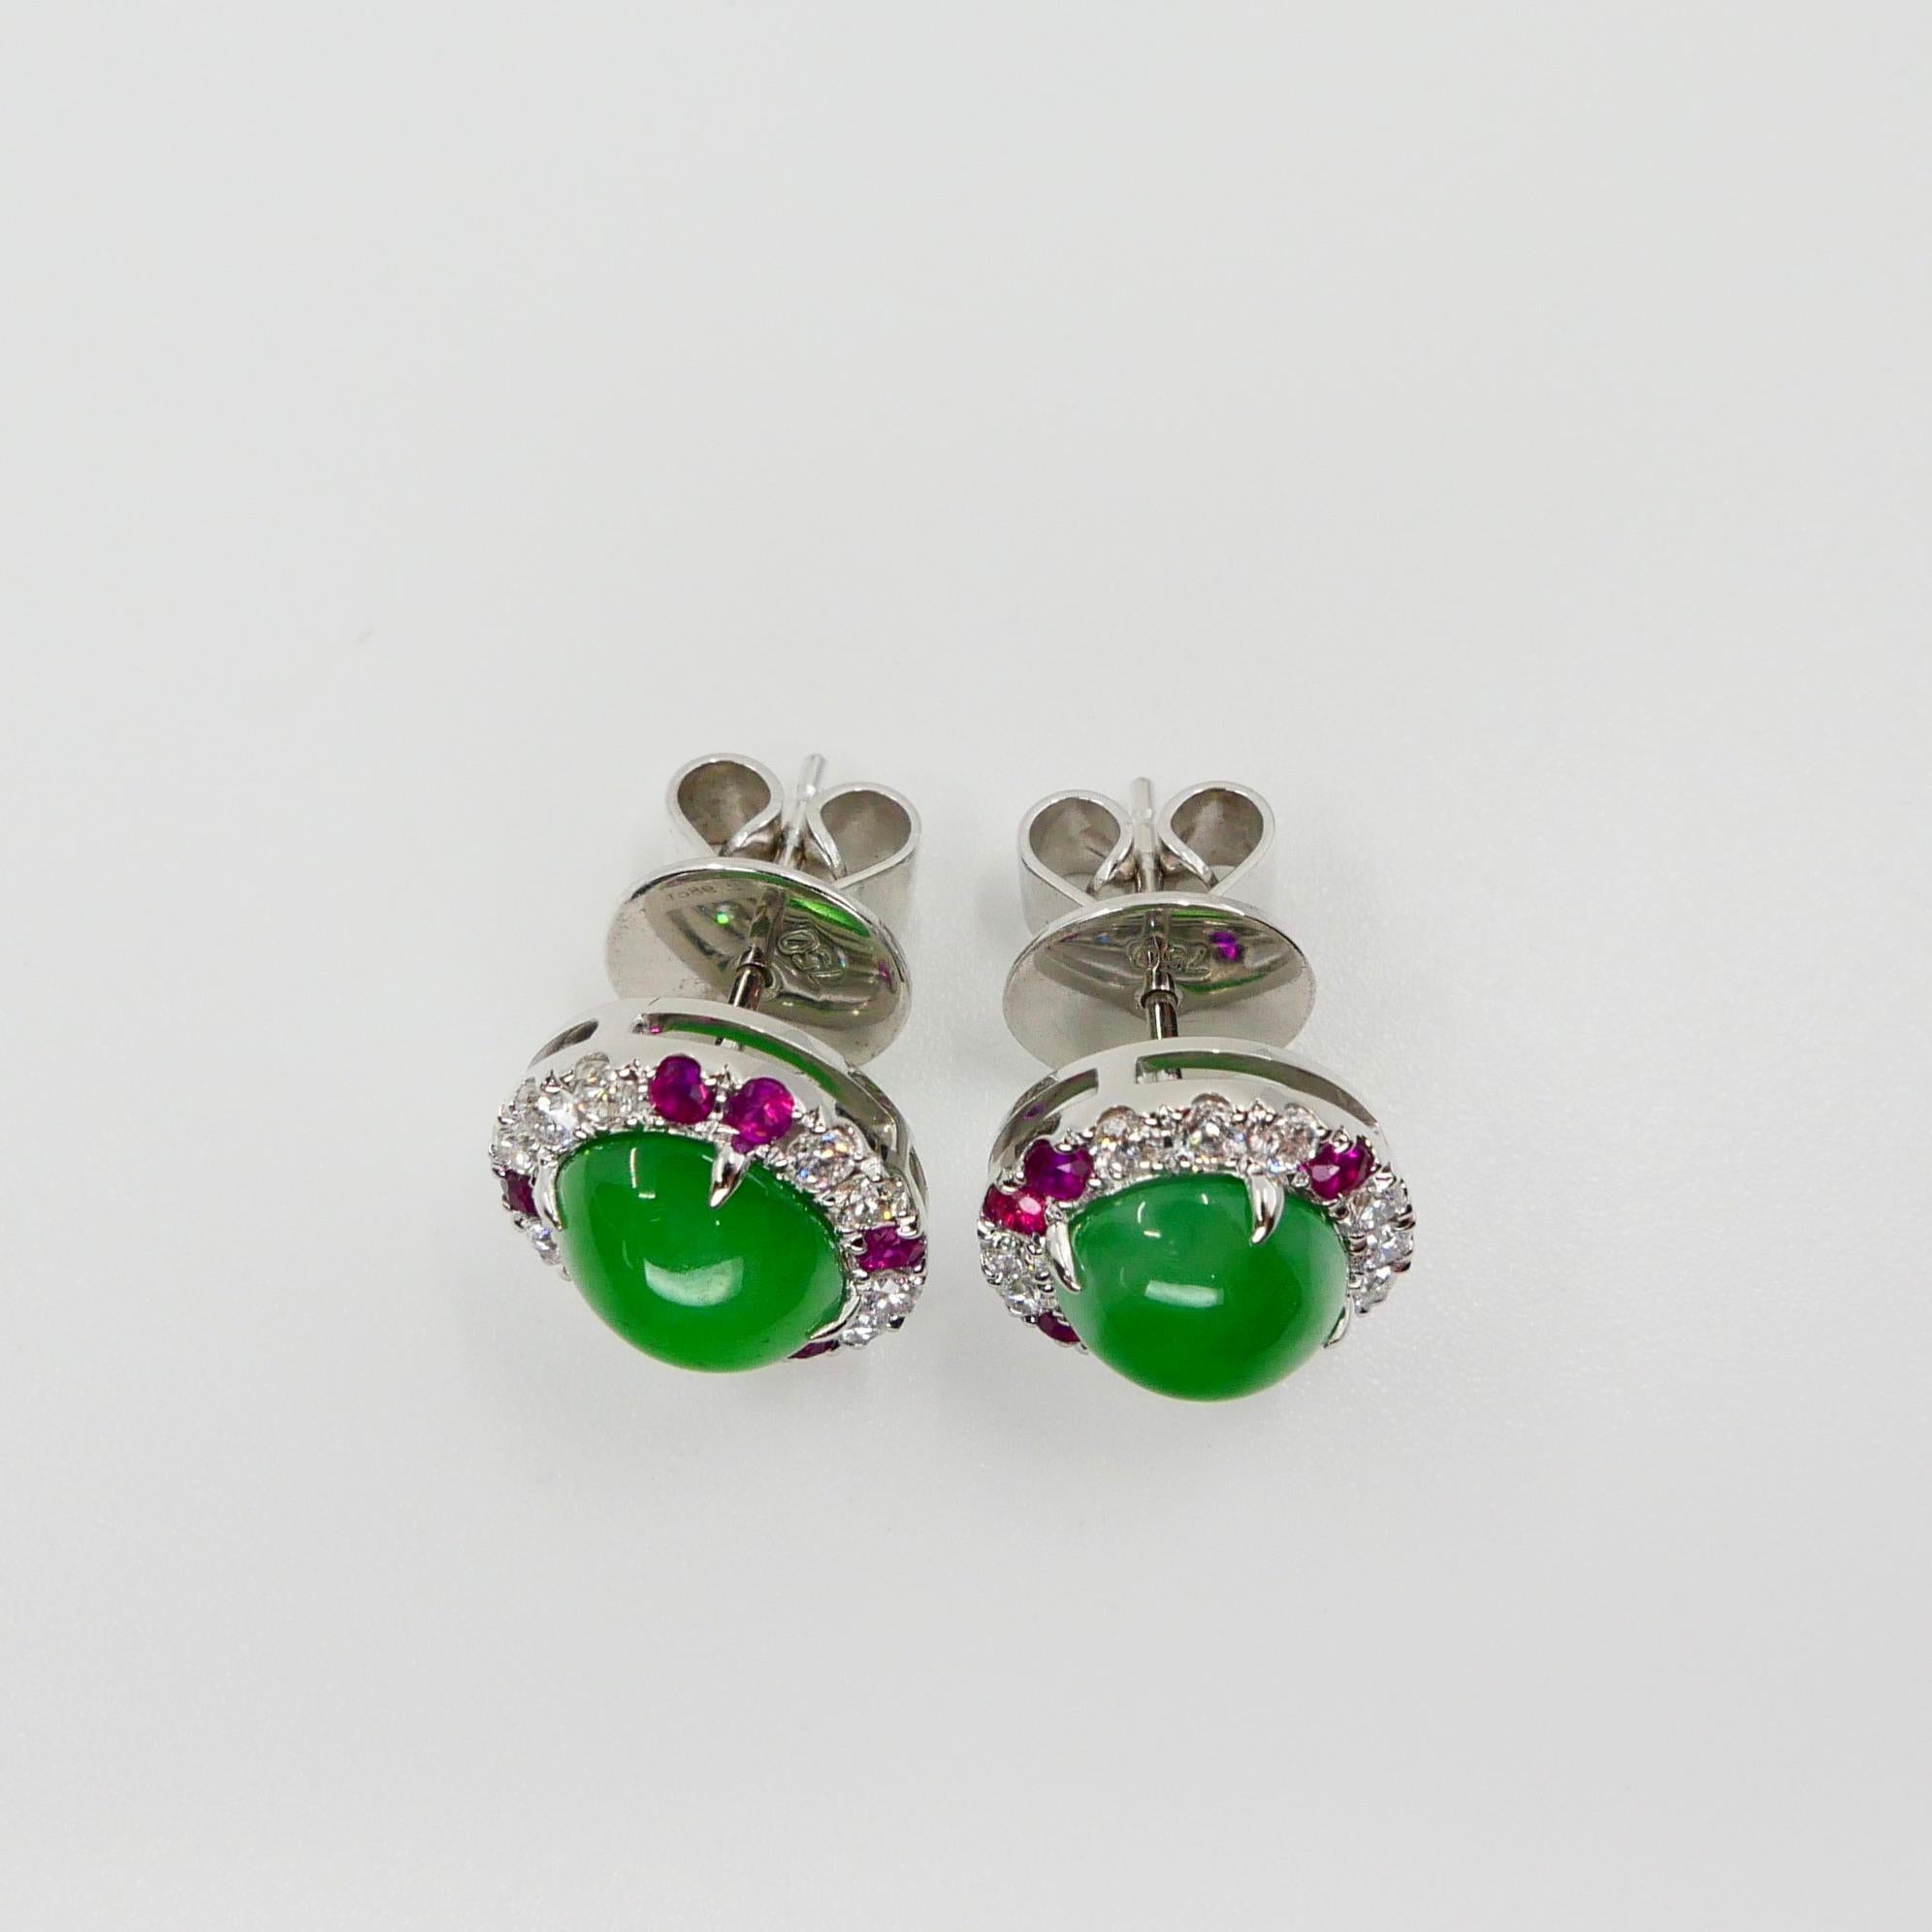 Certified Natural Type A Jade, Ruby and Diamond Stud Earrings, Apple Green Color 7